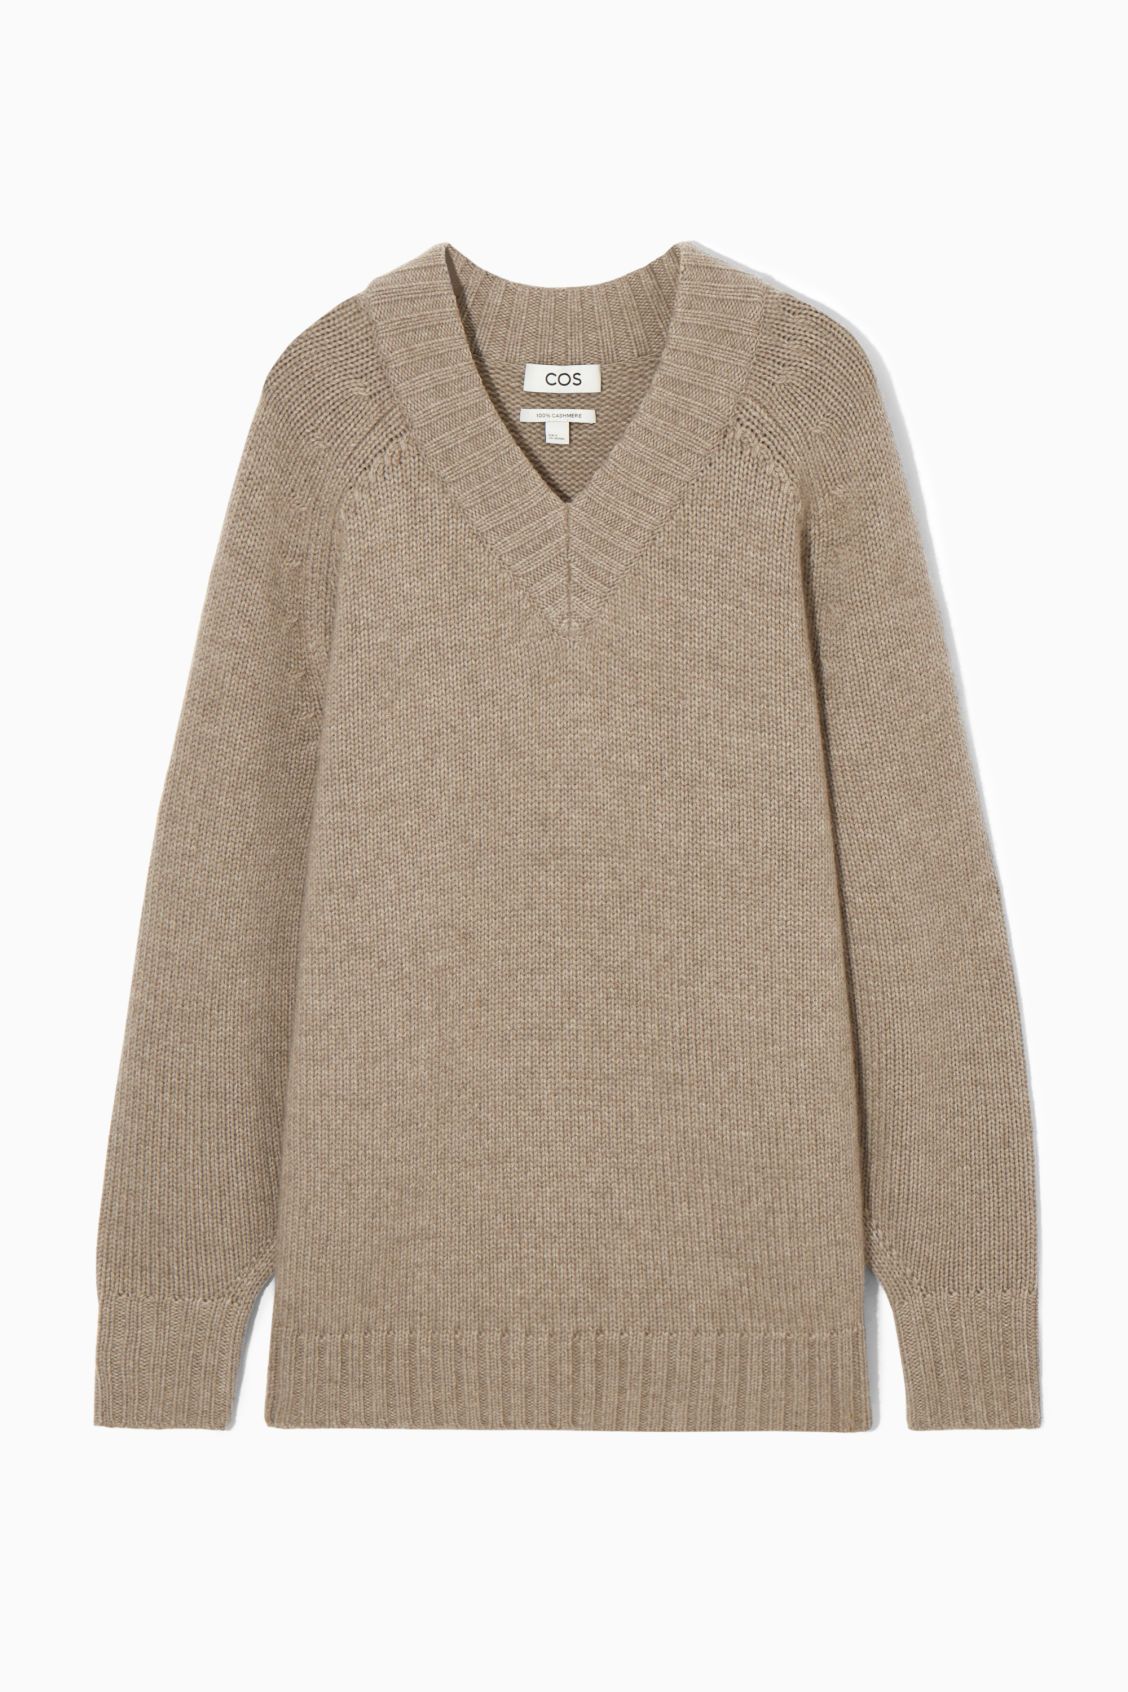 CHUNKY PURE CASHMERE V-NECK JUMPER - UNDYED / BEIGE - Knitwear - COS | COS (US)